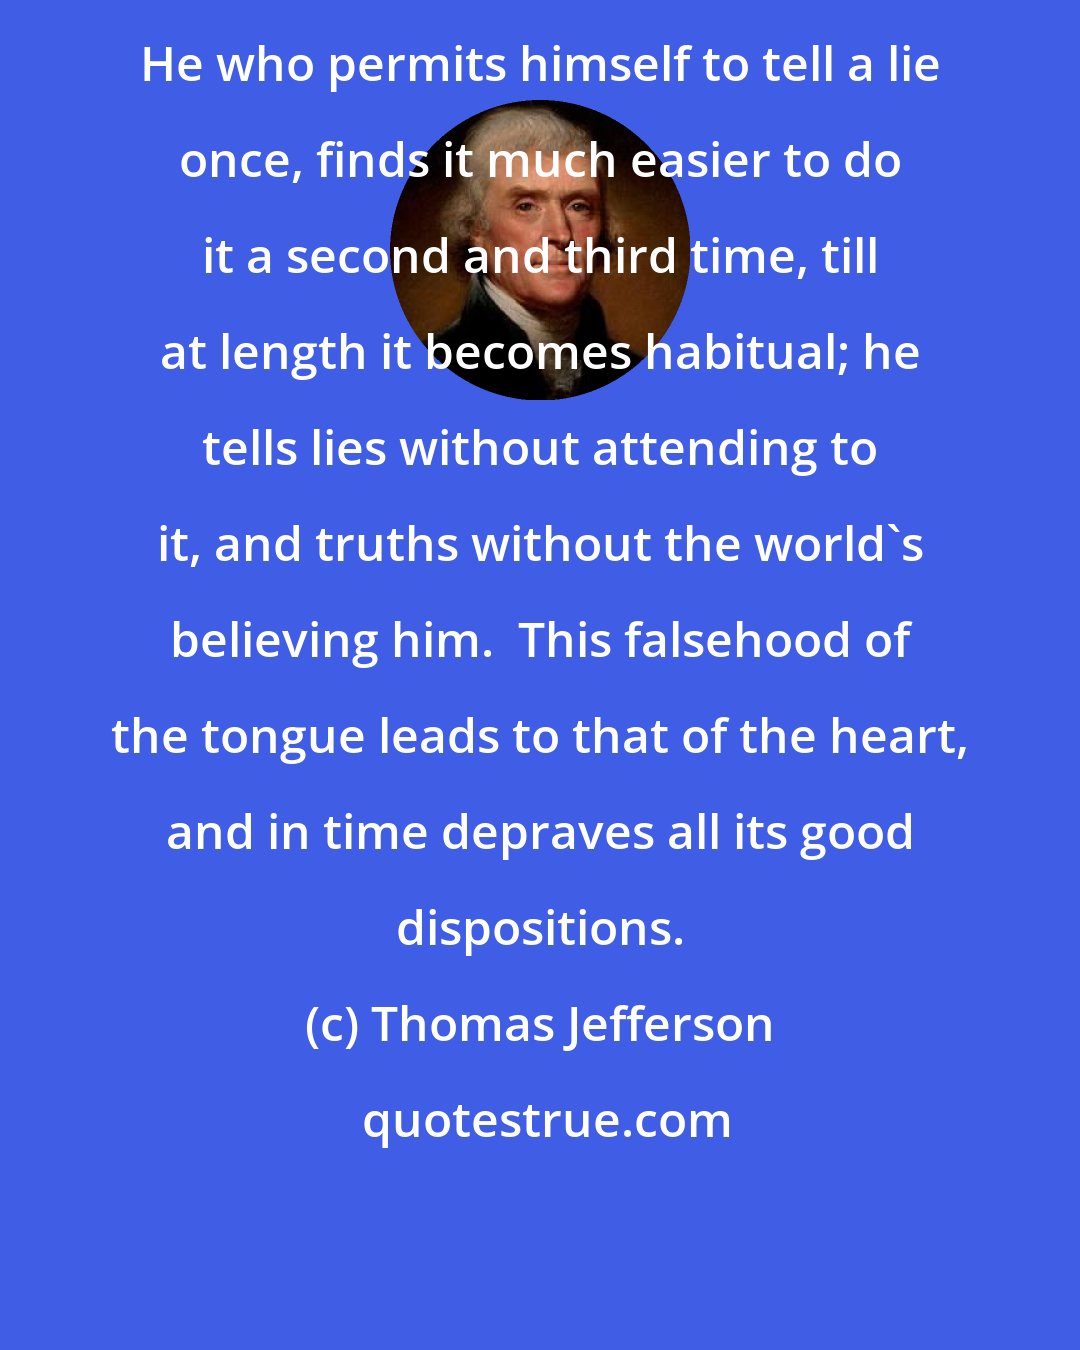 Thomas Jefferson: He who permits himself to tell a lie once, finds it much easier to do it a second and third time, till at length it becomes habitual; he tells lies without attending to it, and truths without the world's believing him.  This falsehood of the tongue leads to that of the heart, and in time depraves all its good dispositions.